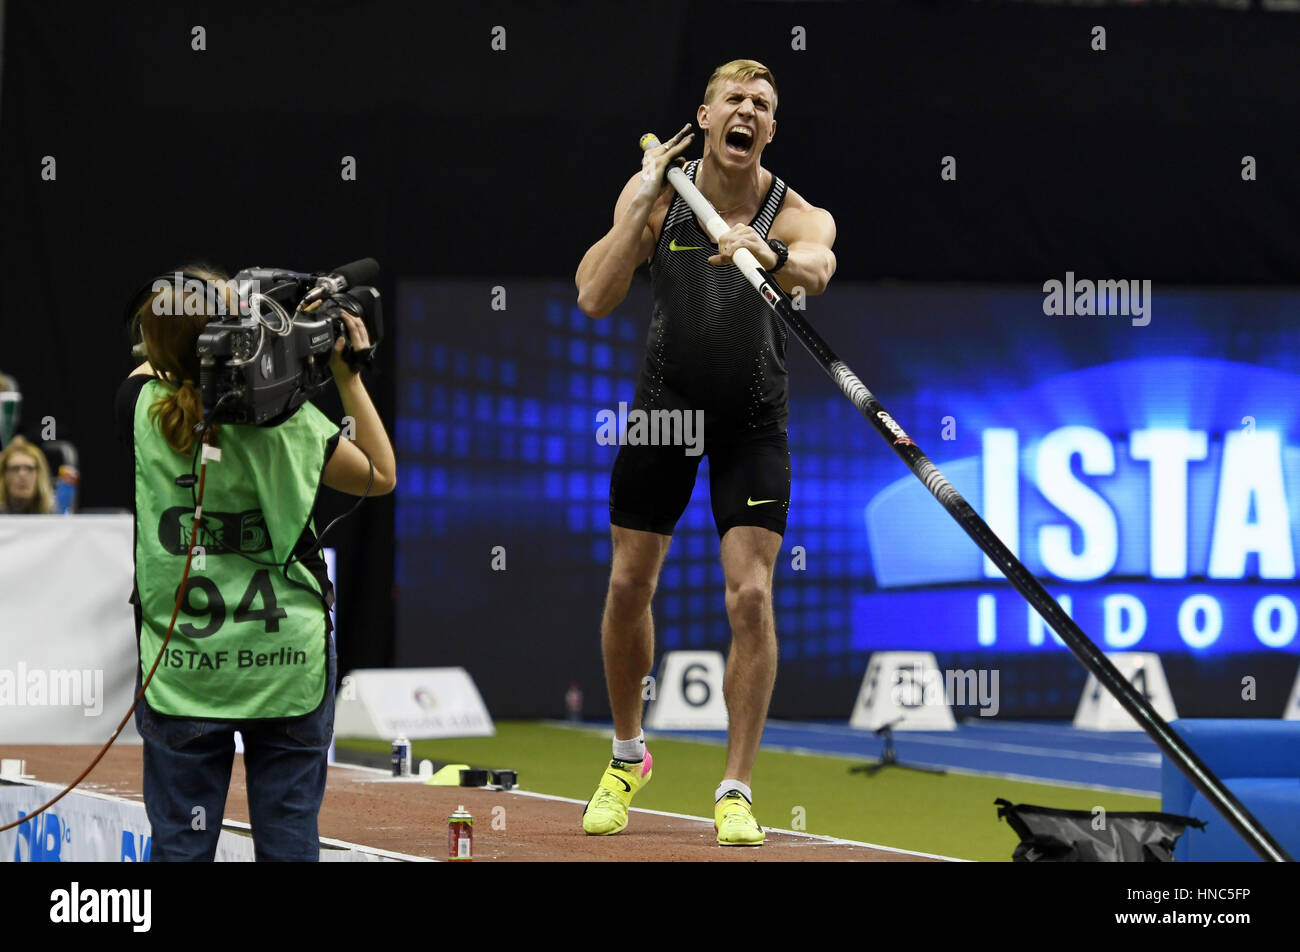 Berlin, Germany. 10th February 2017. ISTAF Indoor 2017, Mercedes-Benz Arena in Berlin, Germany. 10th February, 2017. Pole Vault Men winner Piotr Lisek (Poland) jumping over a height of 5.86 meters Credit: Paul Velasco/Alamy Live News Stock Photo